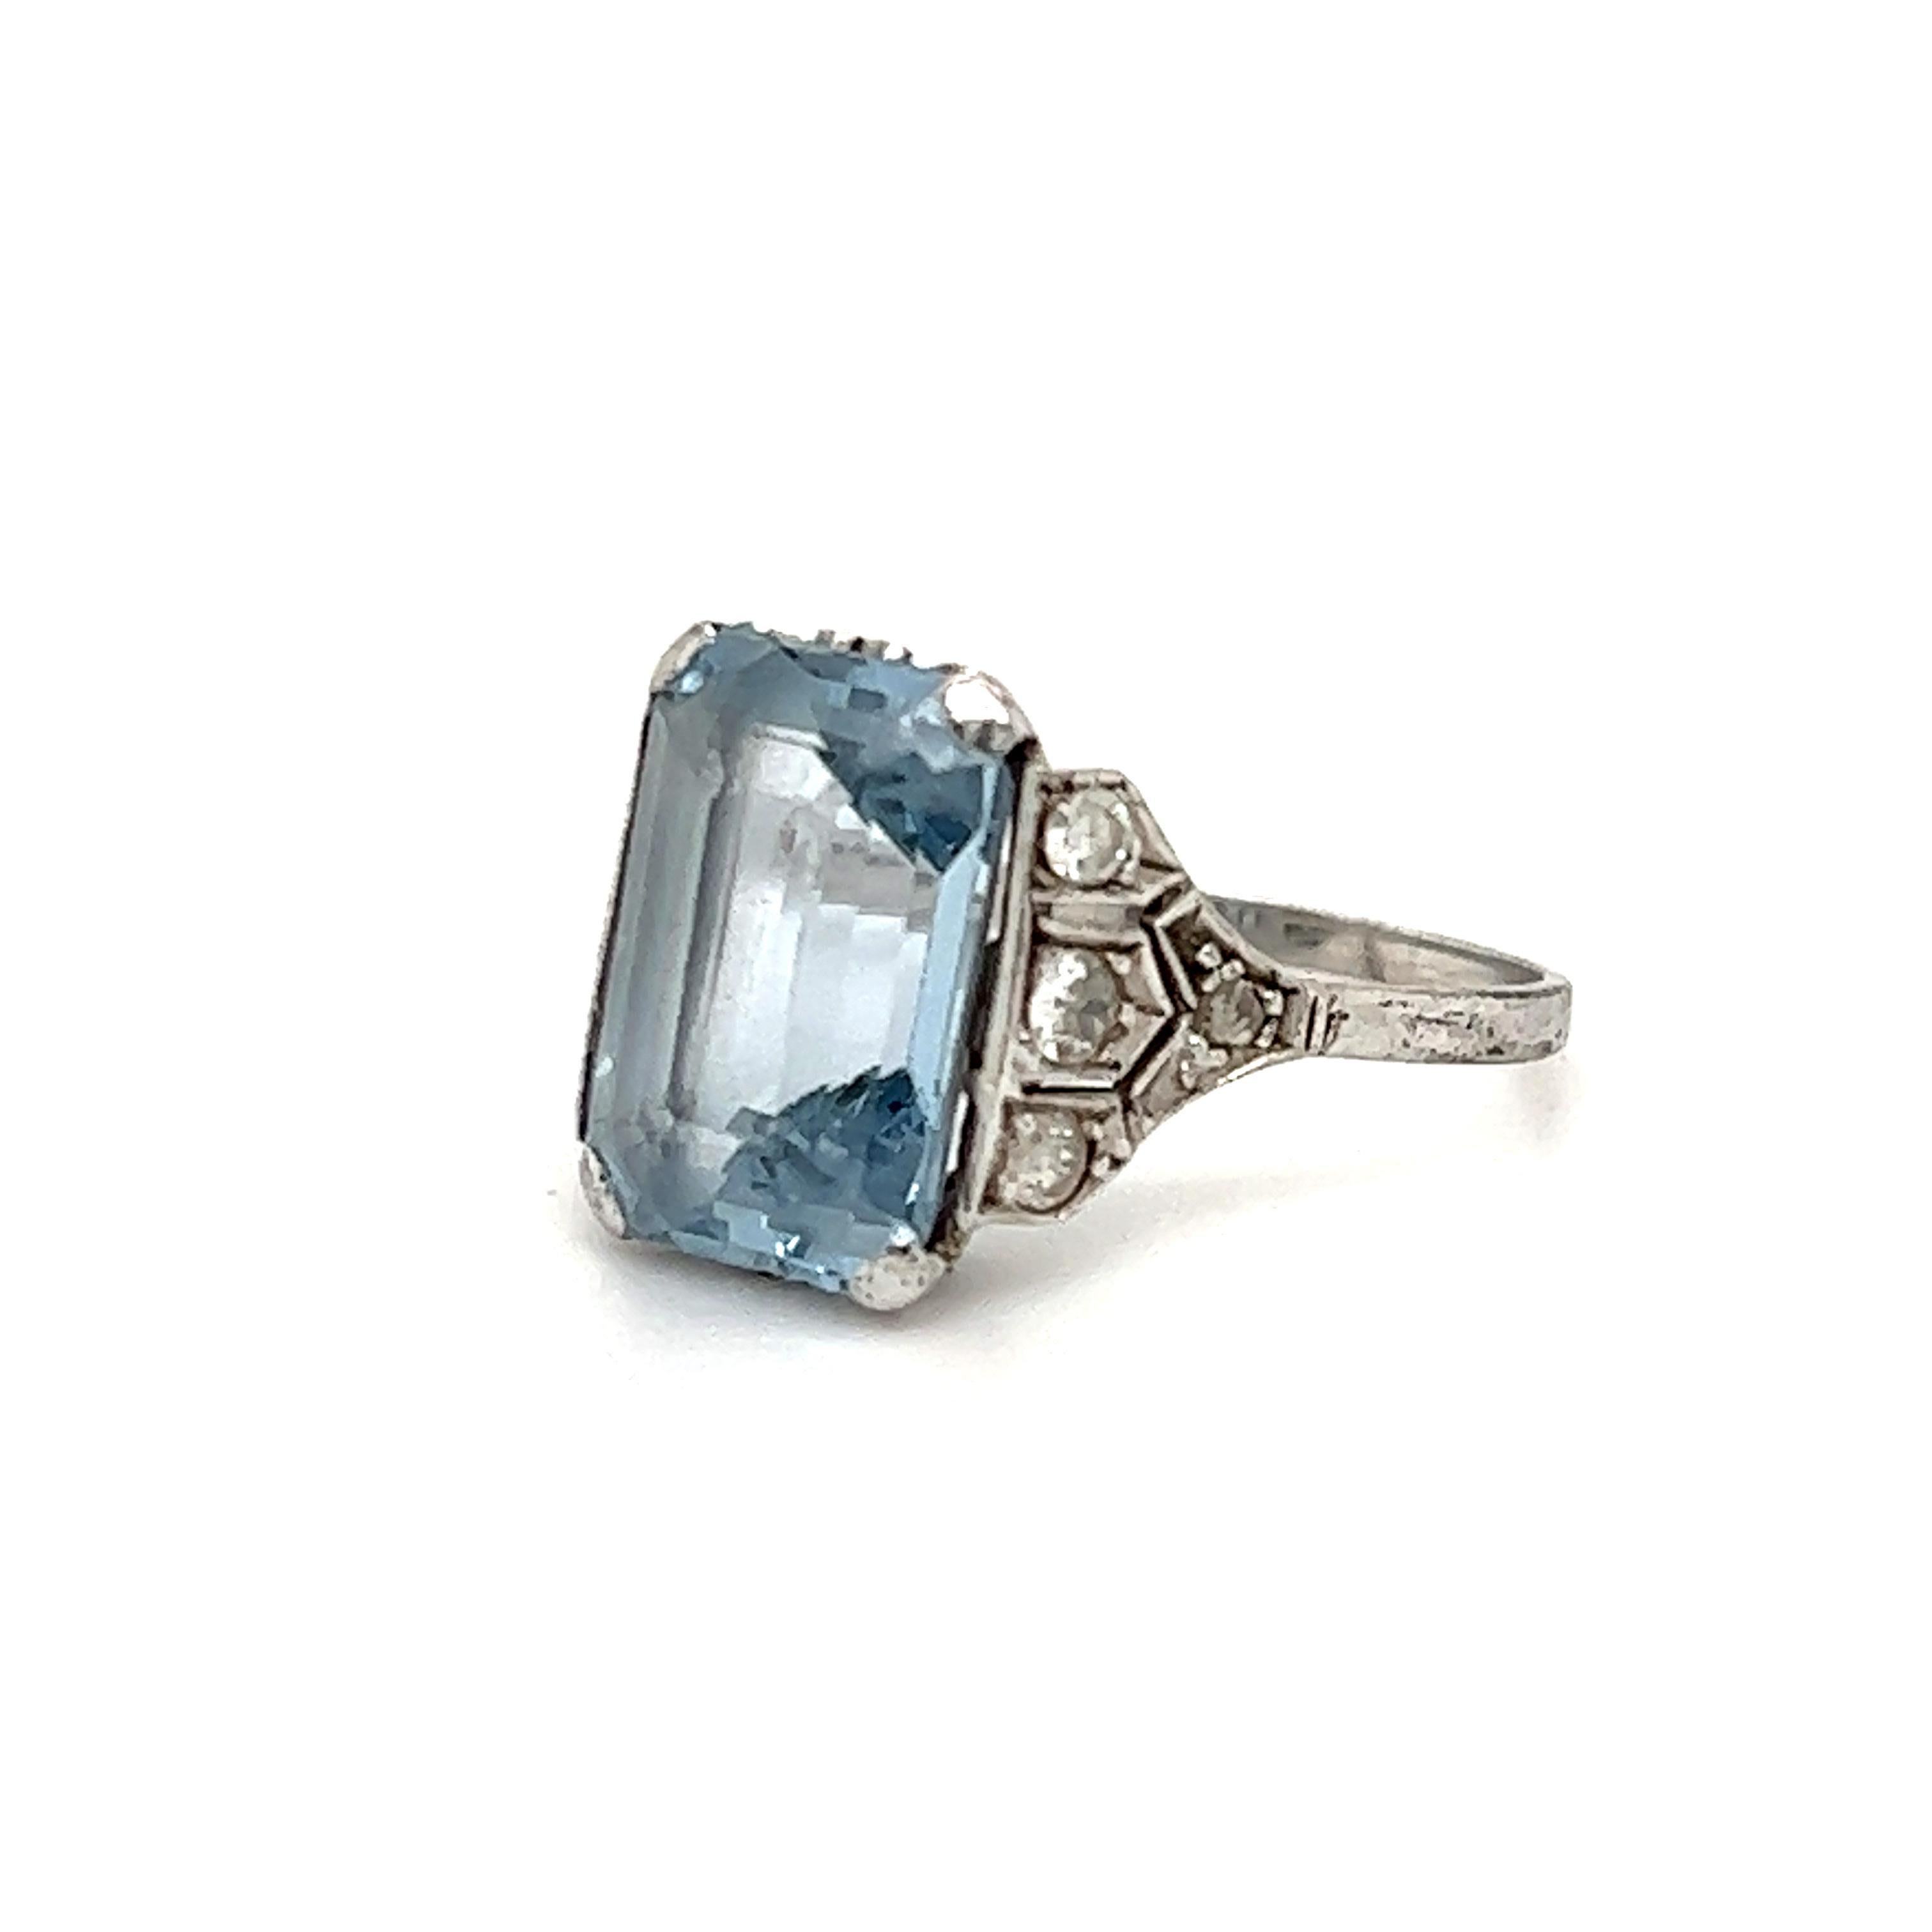 Beautiful art deco ring, This elegant ring highlights one aqua marine gemstone in a emerald cut shape. The aqua marine gemstone displays a beautiful blue color that contrasts beautifully against the platinum and diamond accents. This ring shows